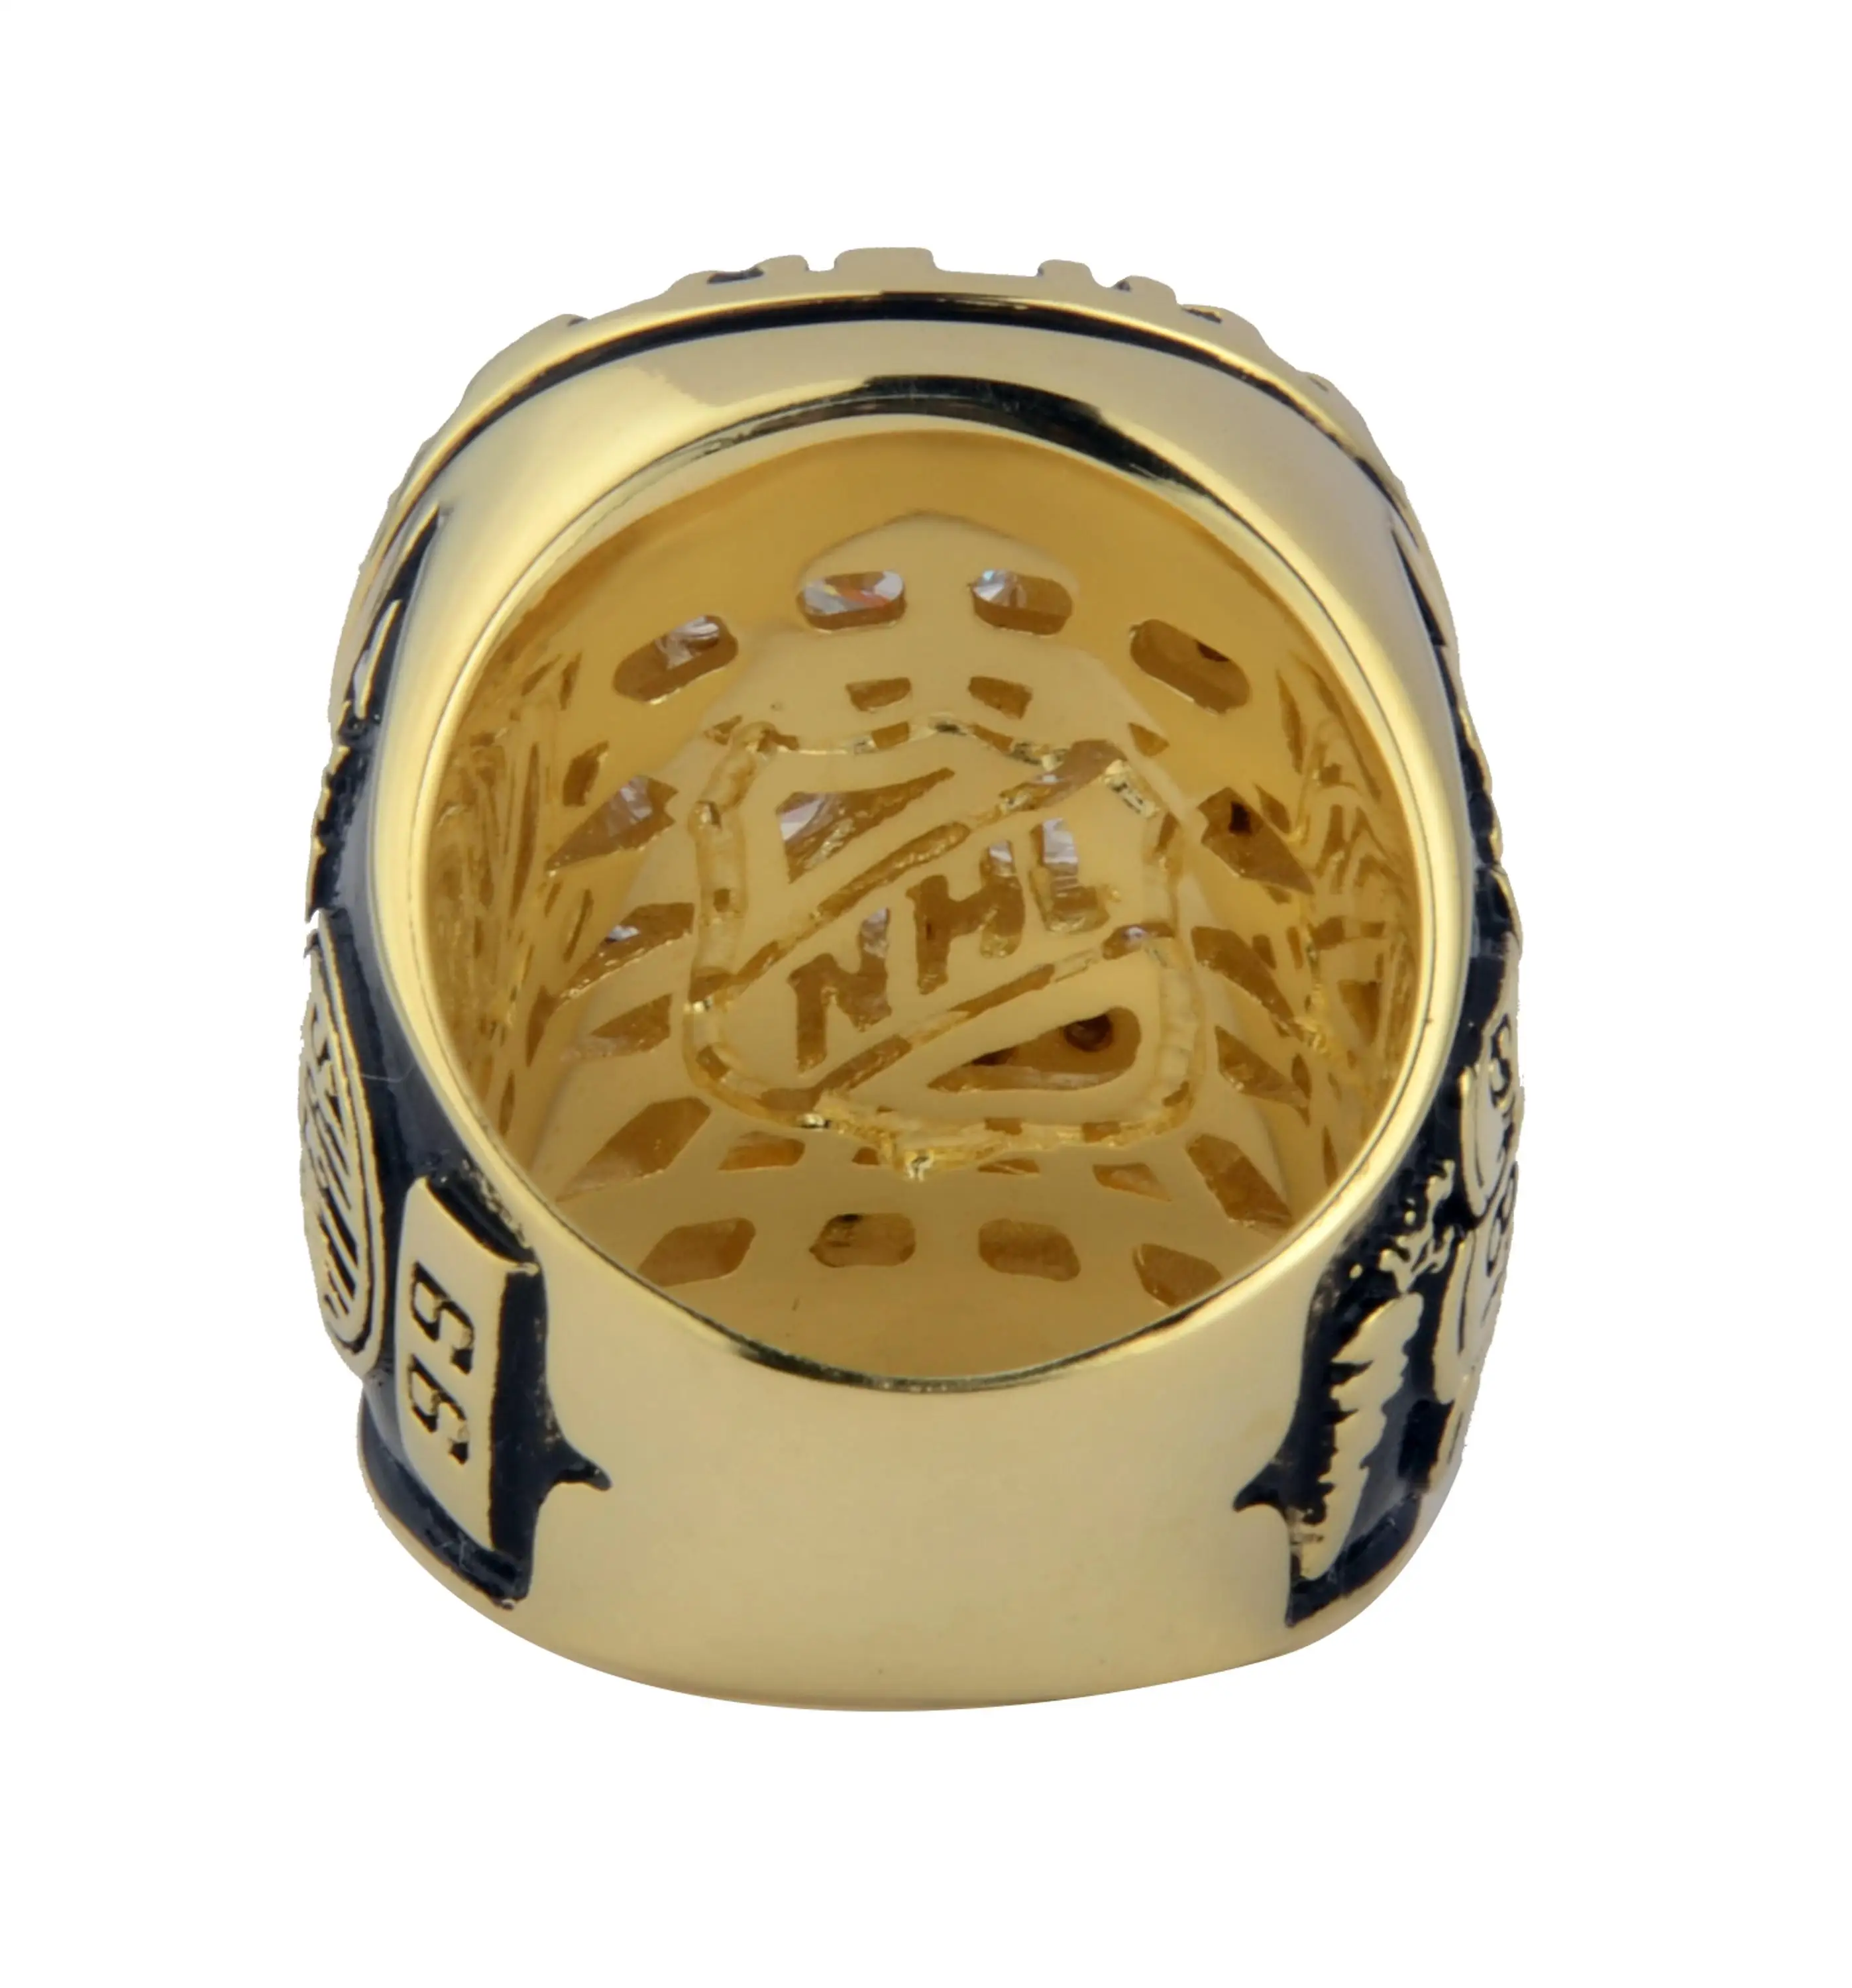 Promotional gift high quality youth championship rings replica designer championship ring